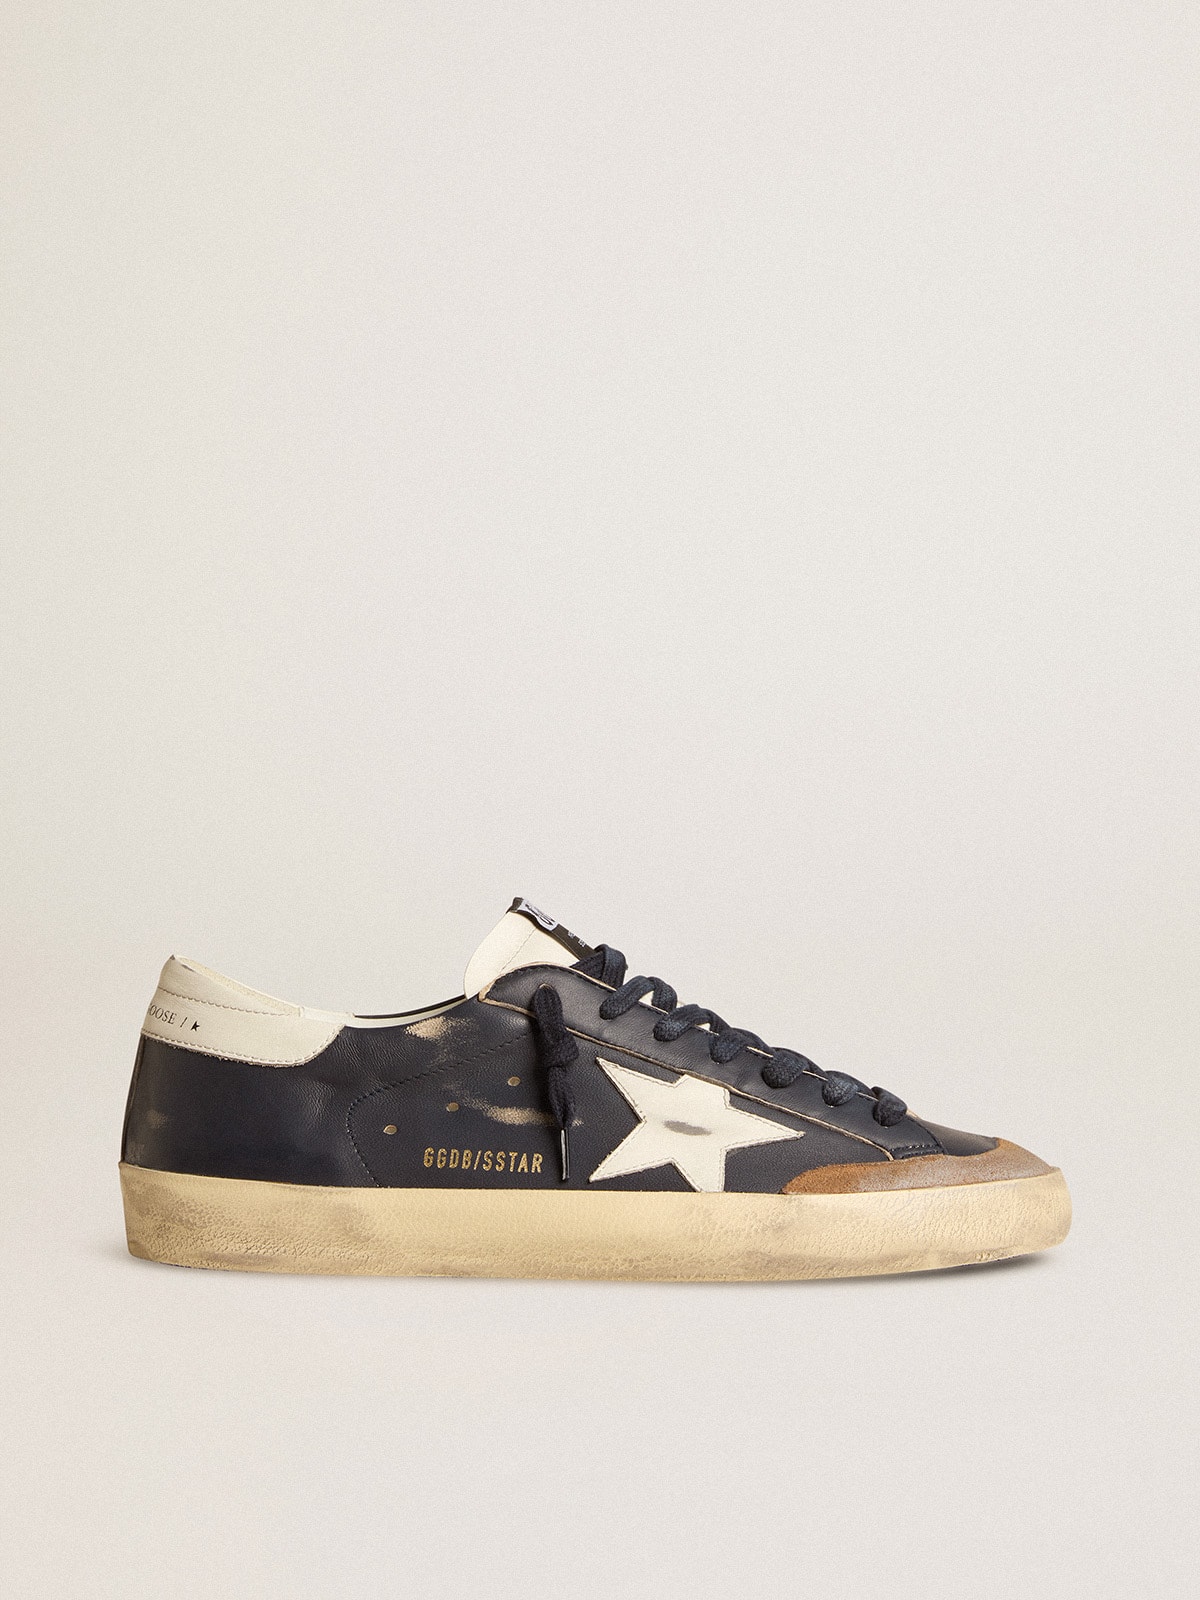 Men's Super-Star in blue nappa leather with white leather star and heel ...